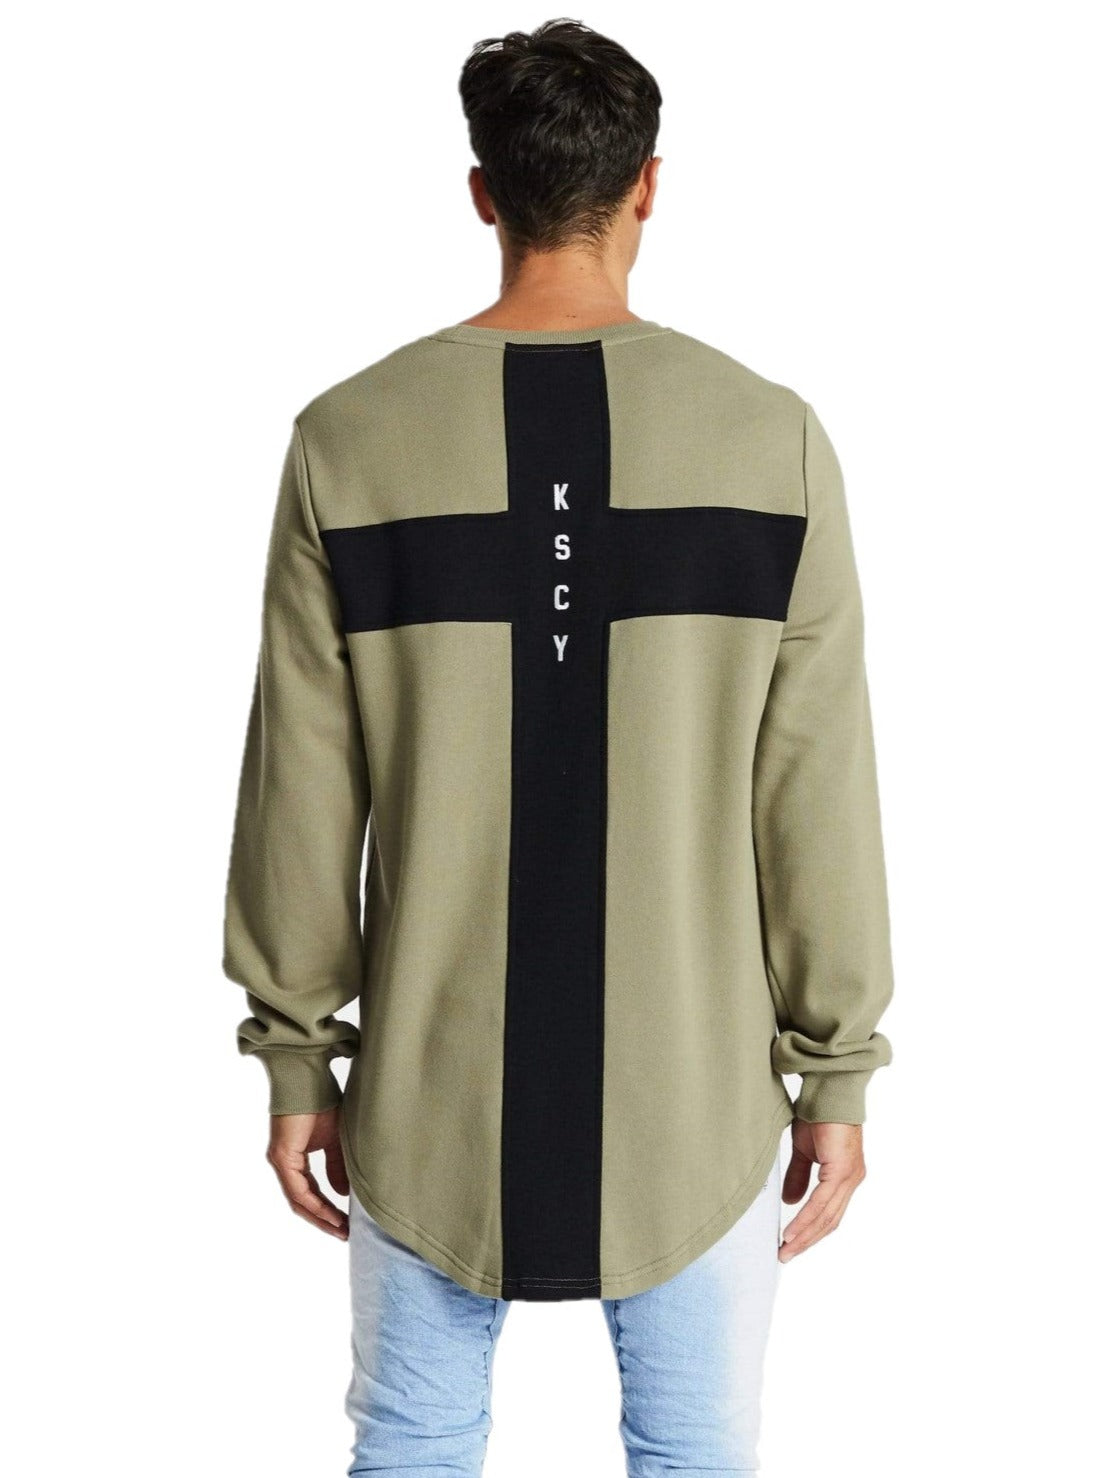 Kiss Chacey - Intersect Dual Curved Sweater - Khaki